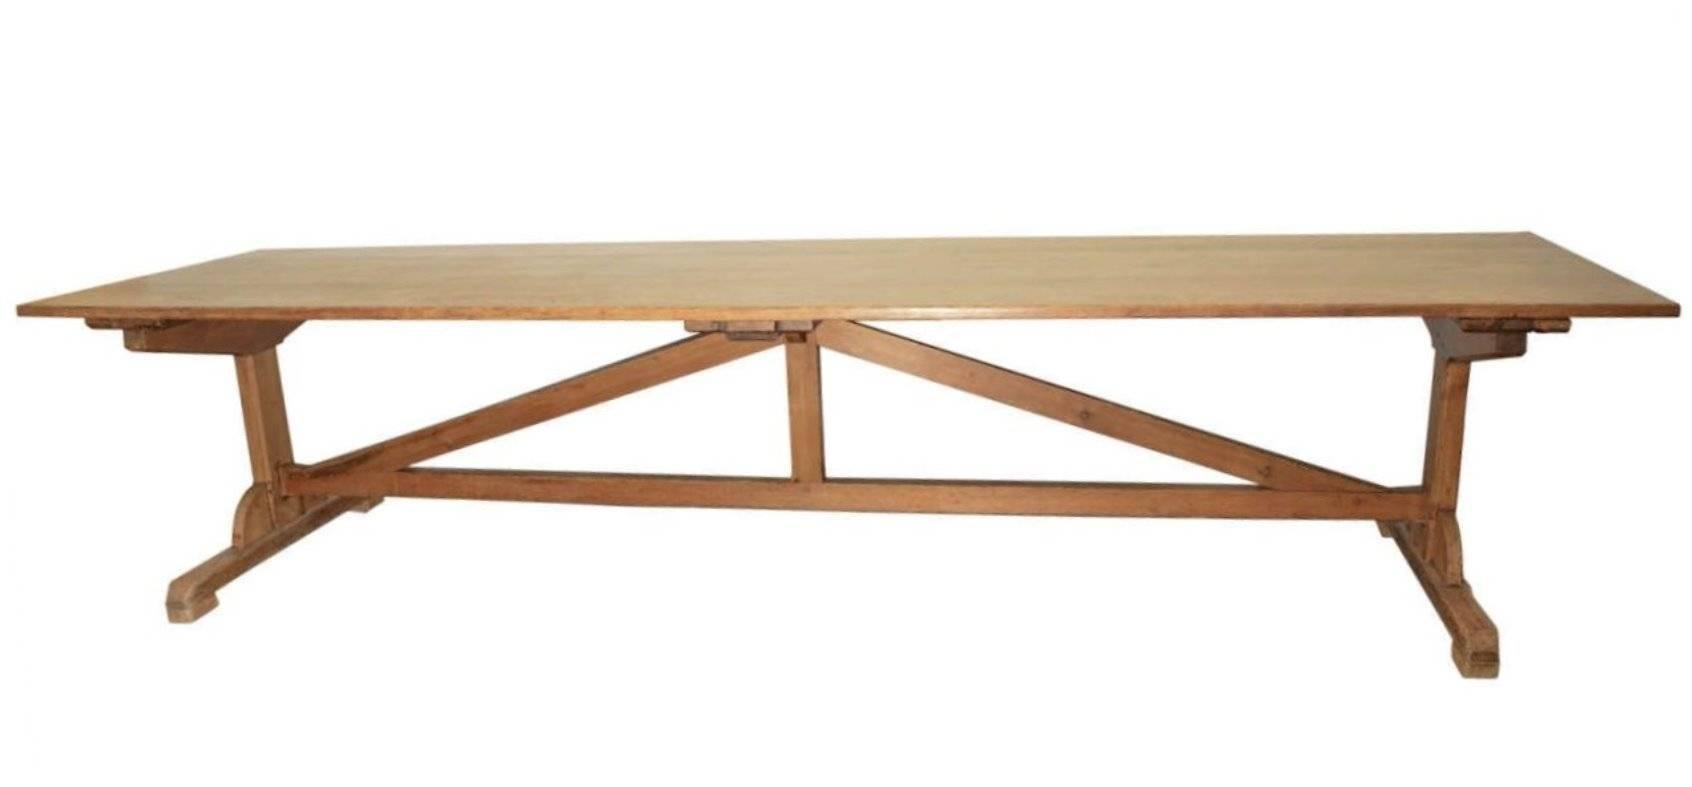 Long Rustic American farm table with trestle style base